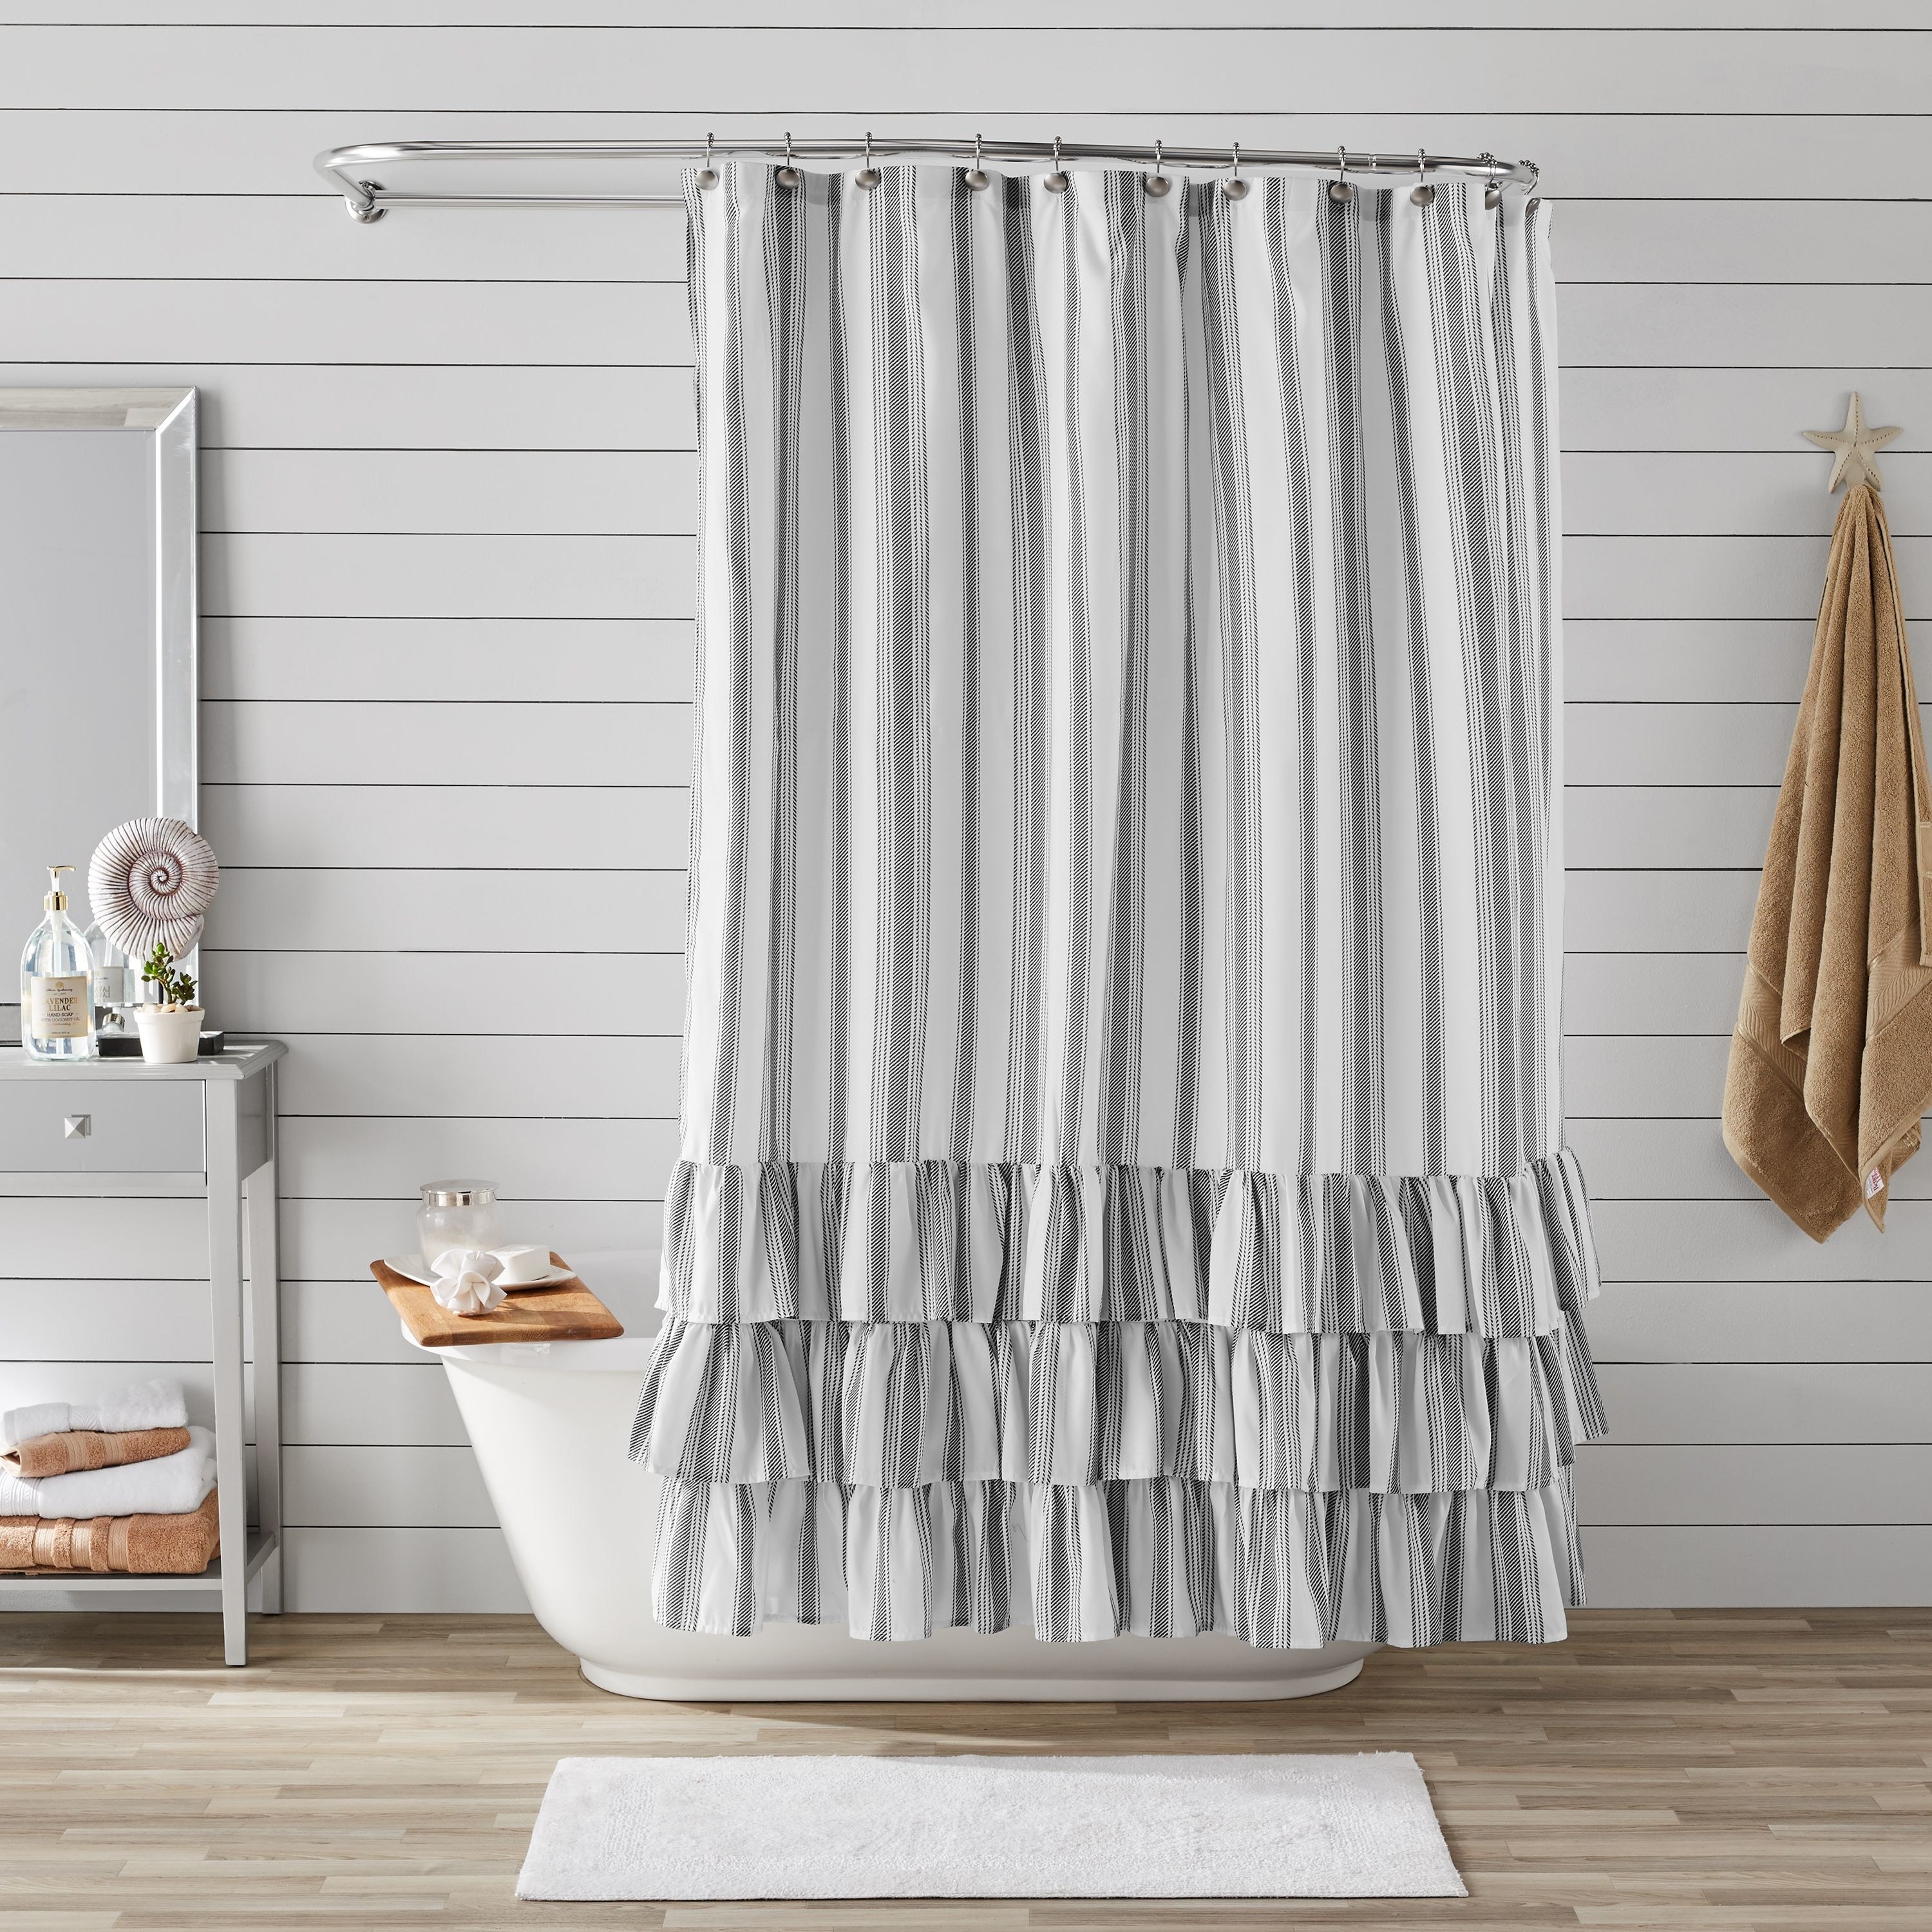 The grey and white striped shower curtain with bottom ruffles 